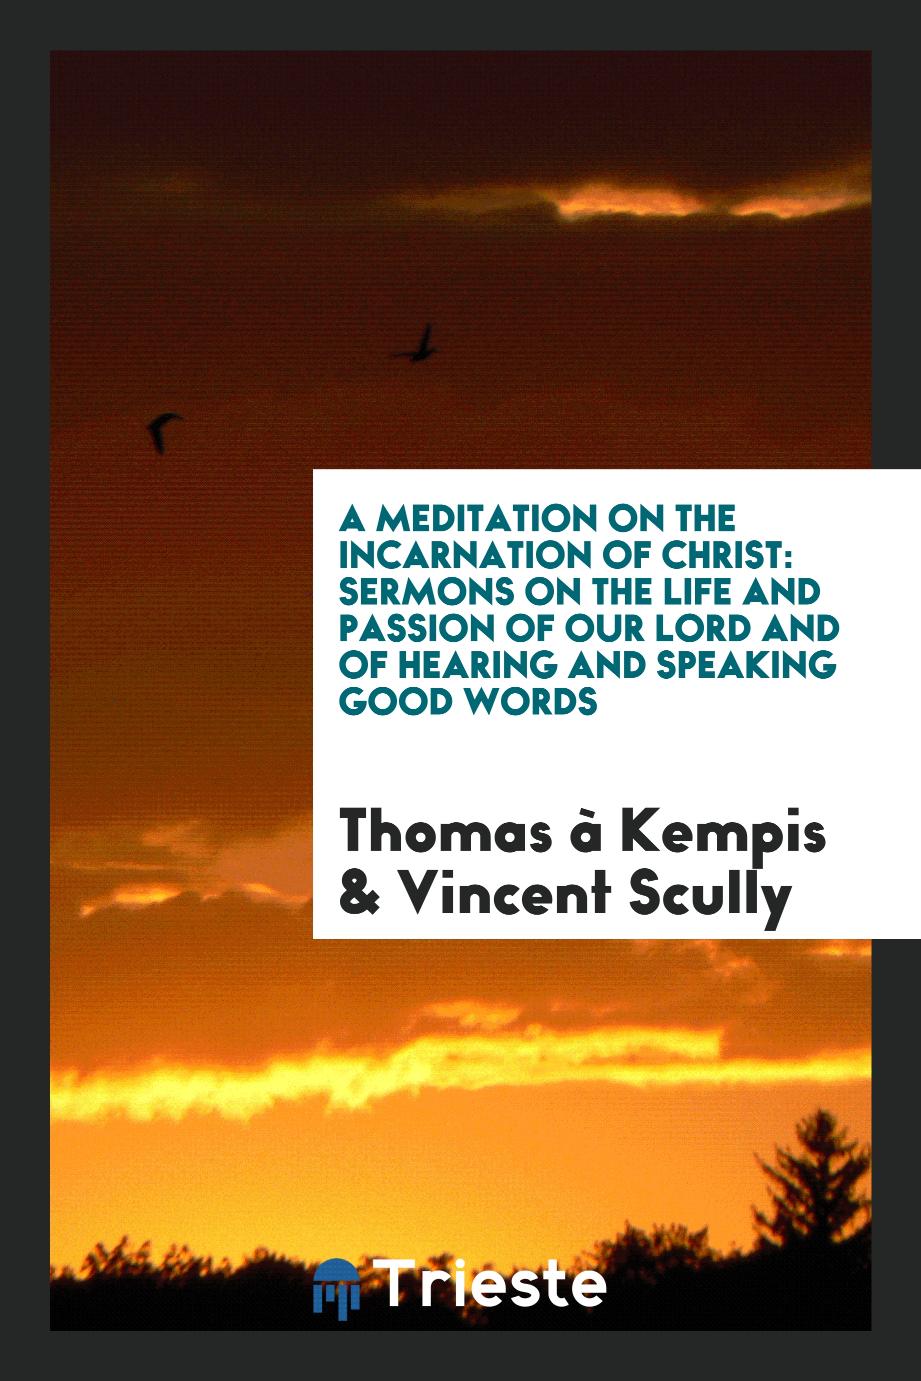 A Meditation on the Incarnation of Christ: Sermons on the Life and Passion of Our Lord and of Hearing and Speaking Good Words